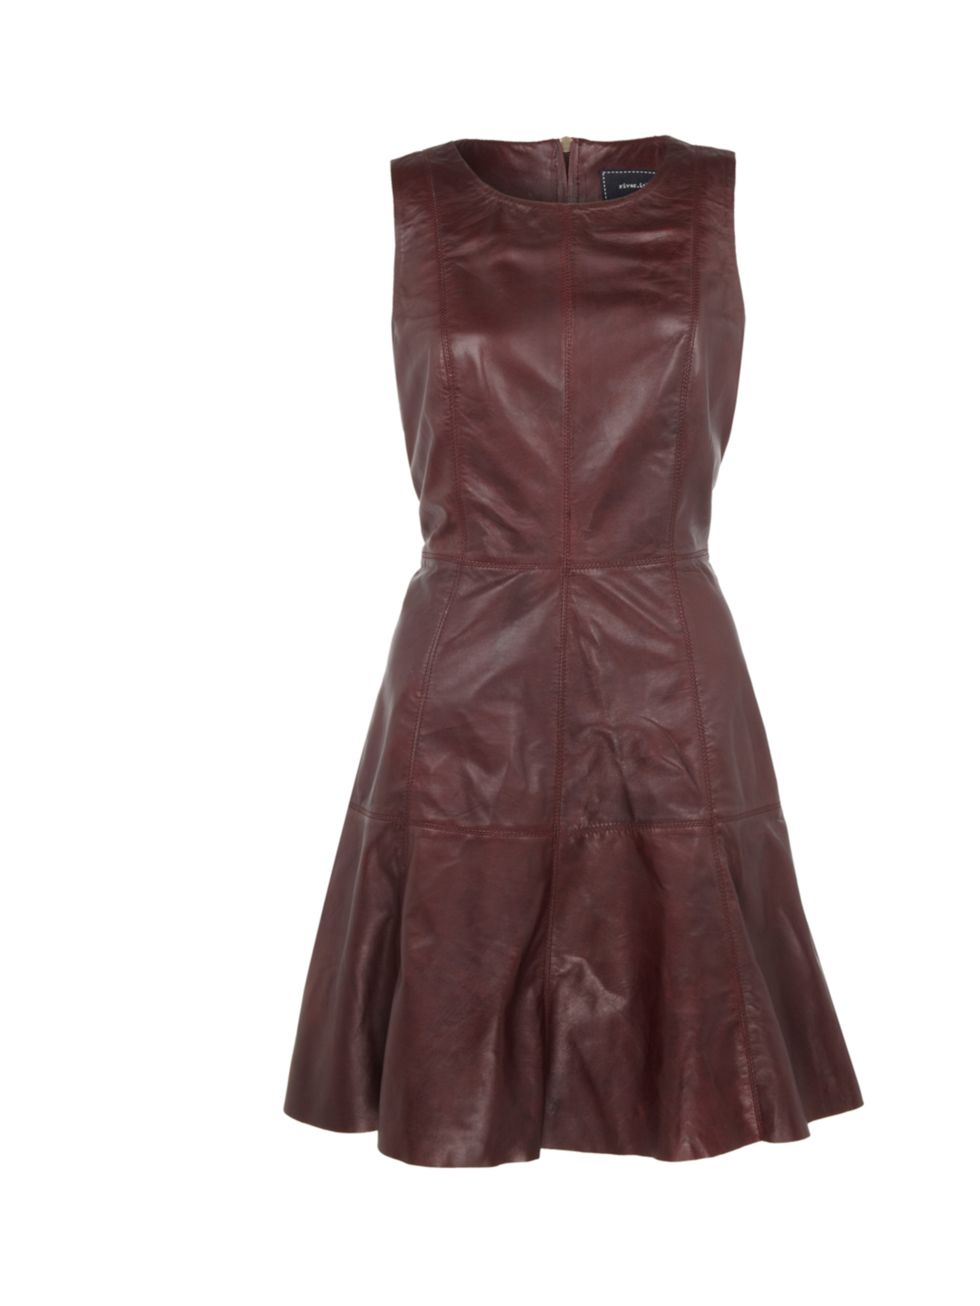 <p><a href="http://www.riverisland.com/women/dresses/party--evening-dresses/dark-red-leather-fit-and-flare-dress-620811">River Island</a> burgundy leather skater dress, £120</p>